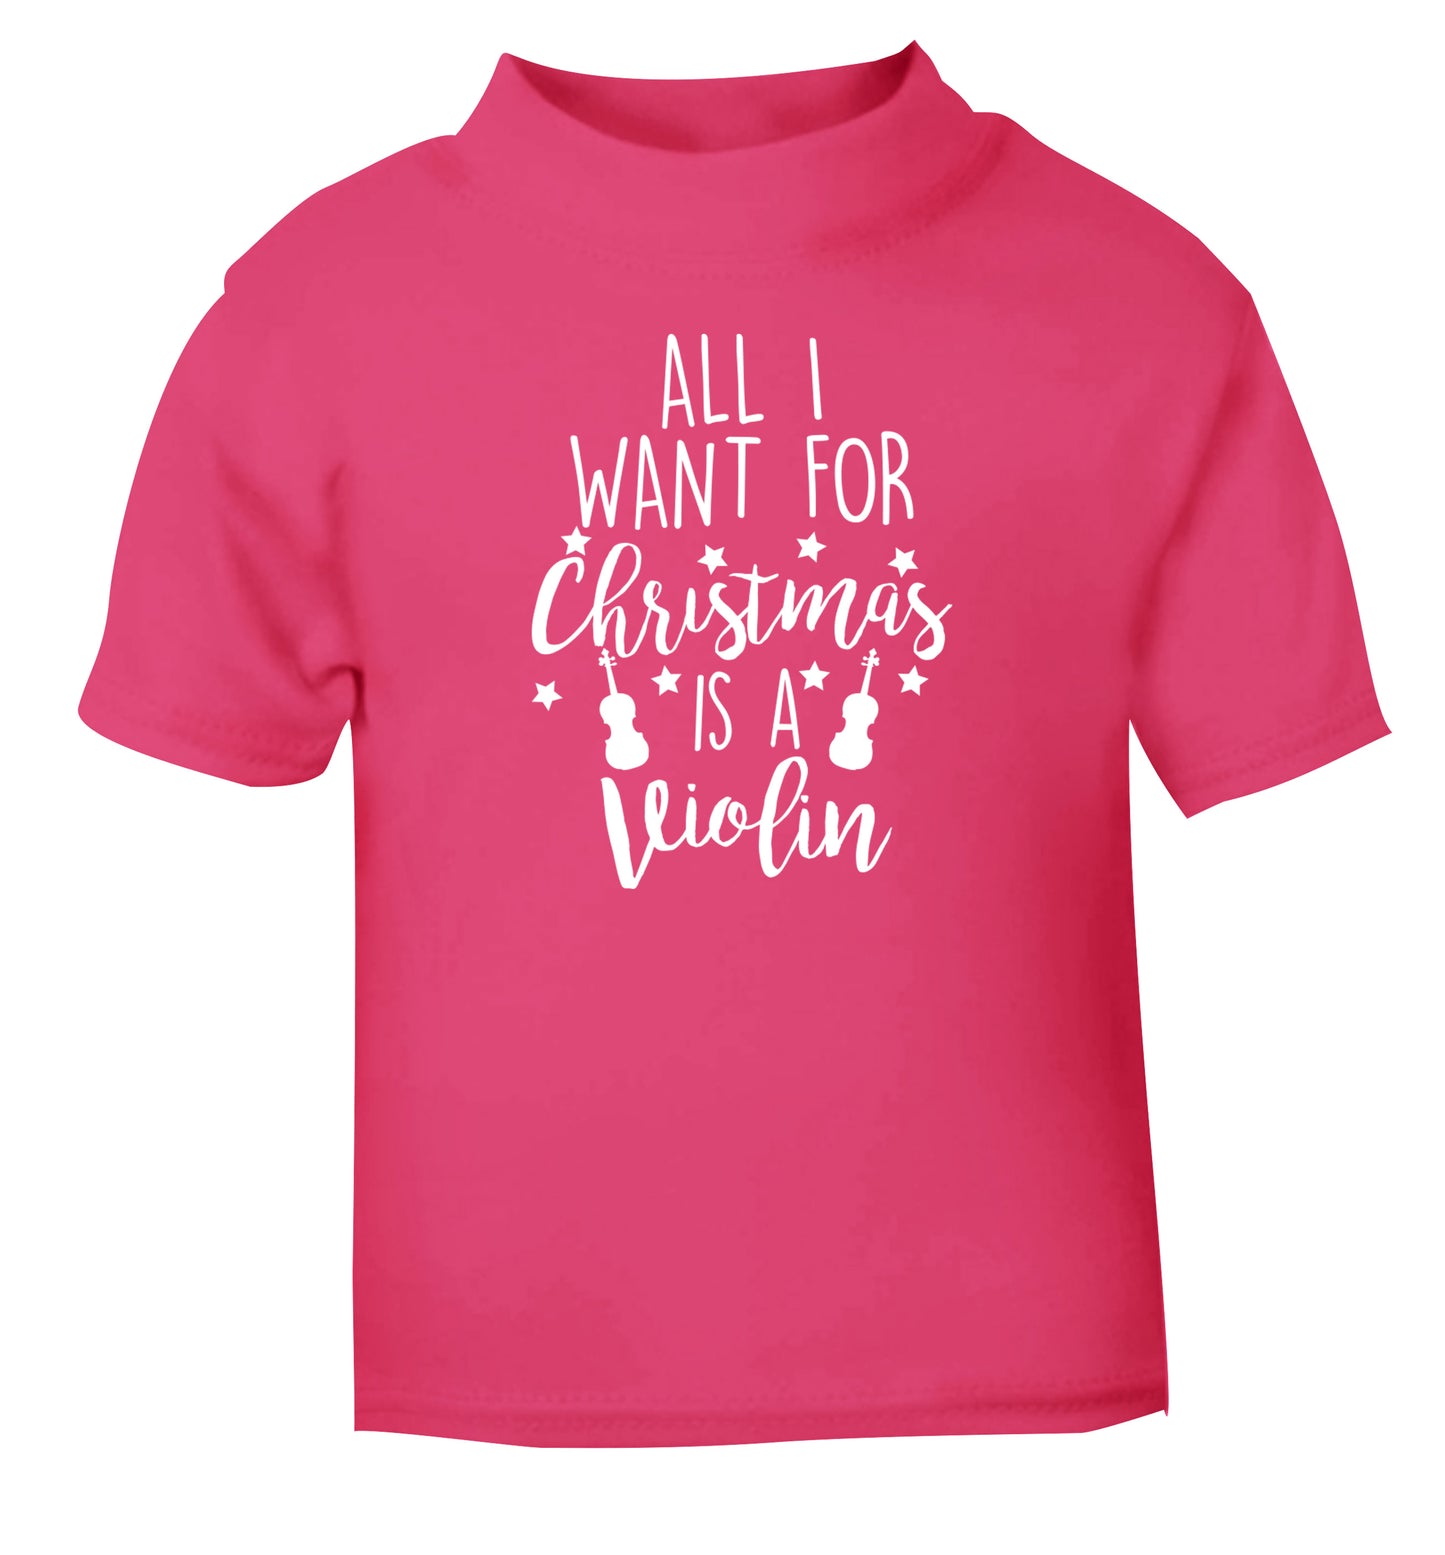 All I Want For Christmas is a Violin pink Baby Toddler Tshirt 2 Years